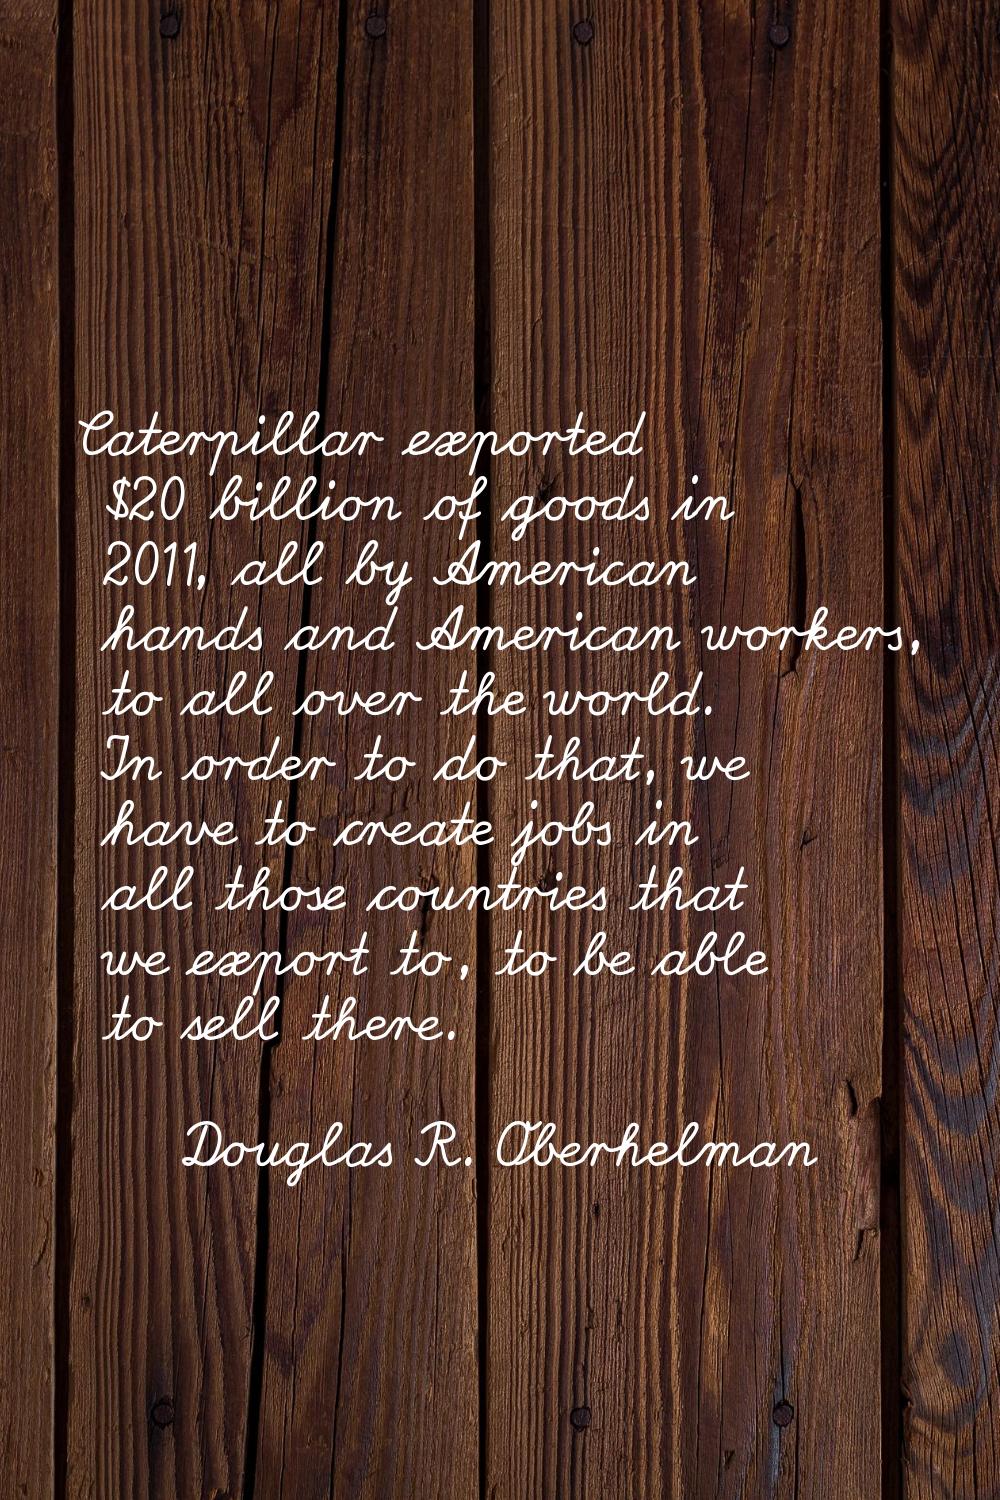 Caterpillar exported $20 billion of goods in 2011, all by American hands and American workers, to a